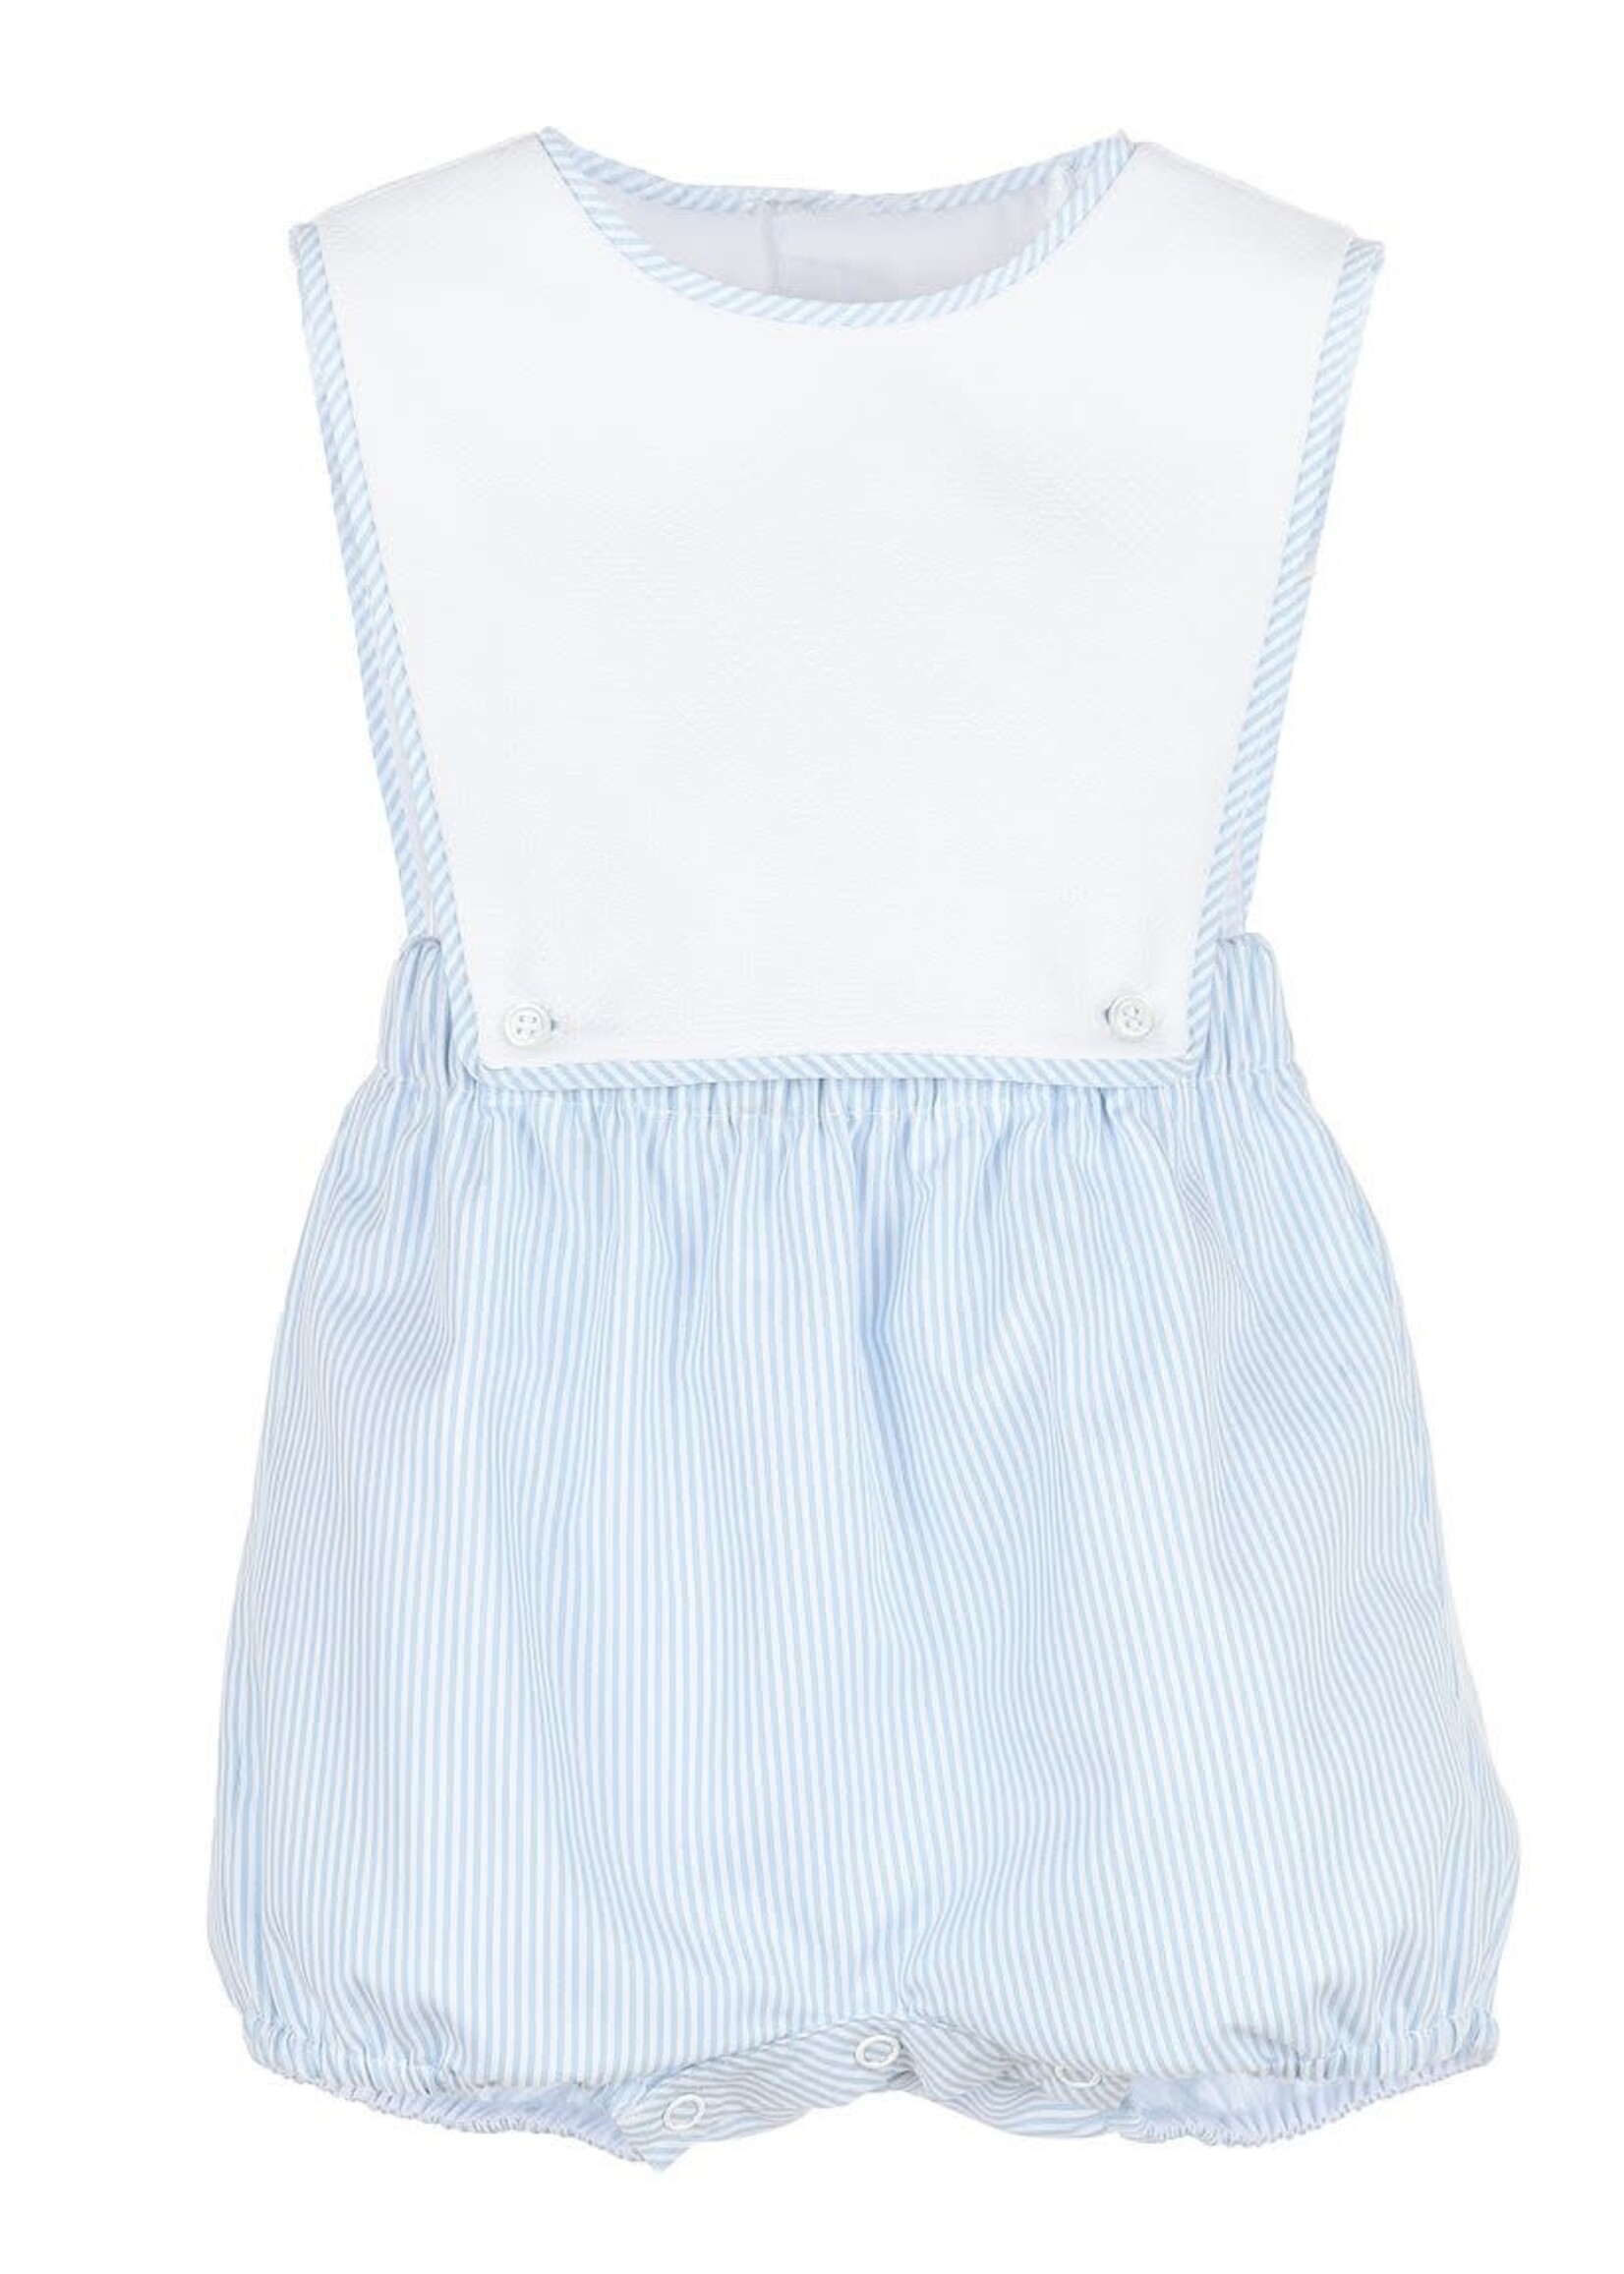 Sophie & Lucas Blue Lakeside Stripes Overall